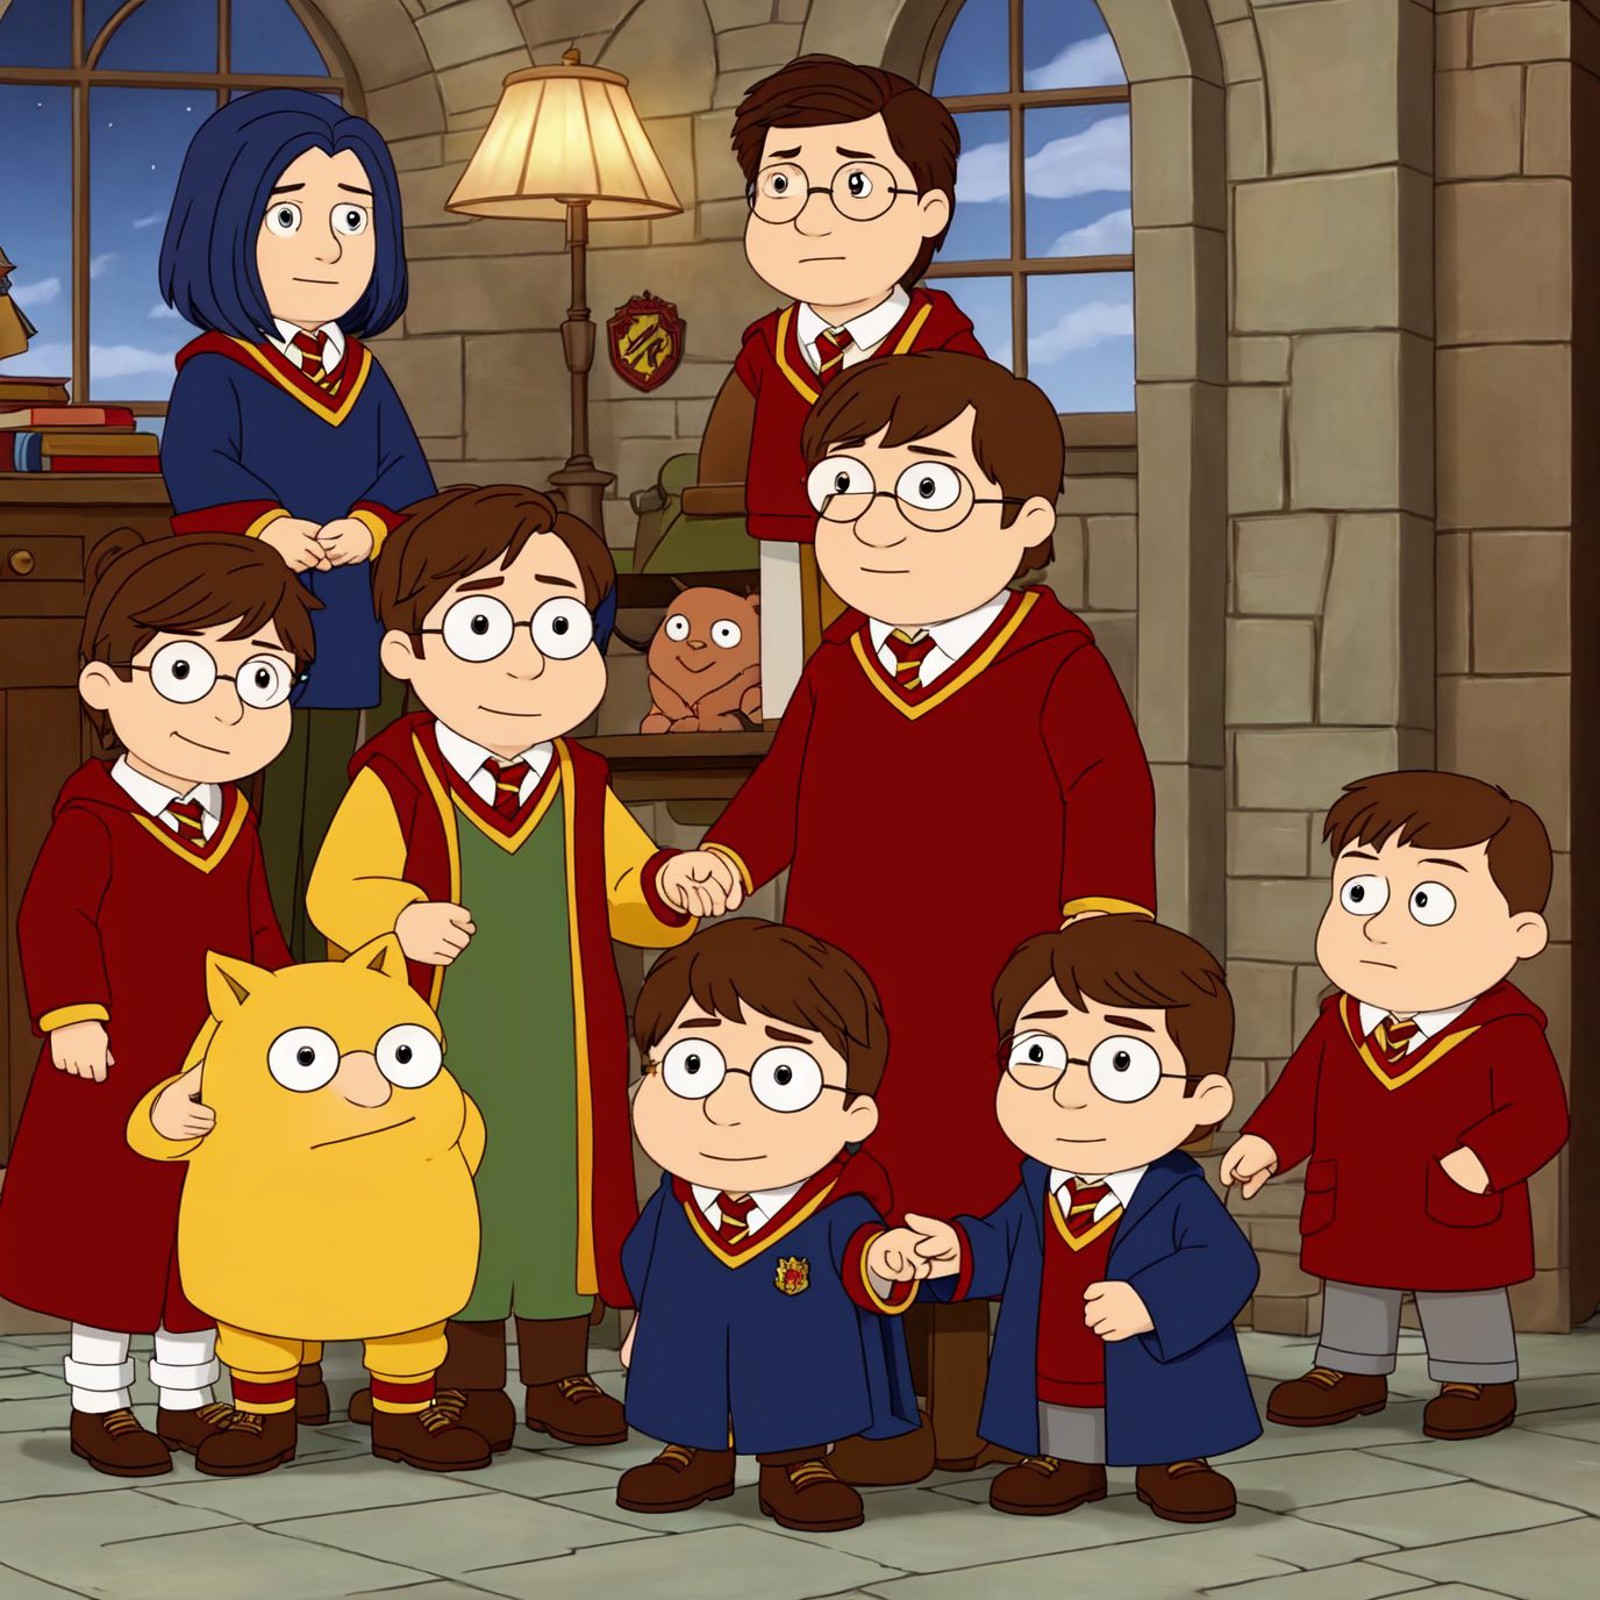 00021-20230531092626-557-A photo of Harry Potter  as a family-guy character.jpg